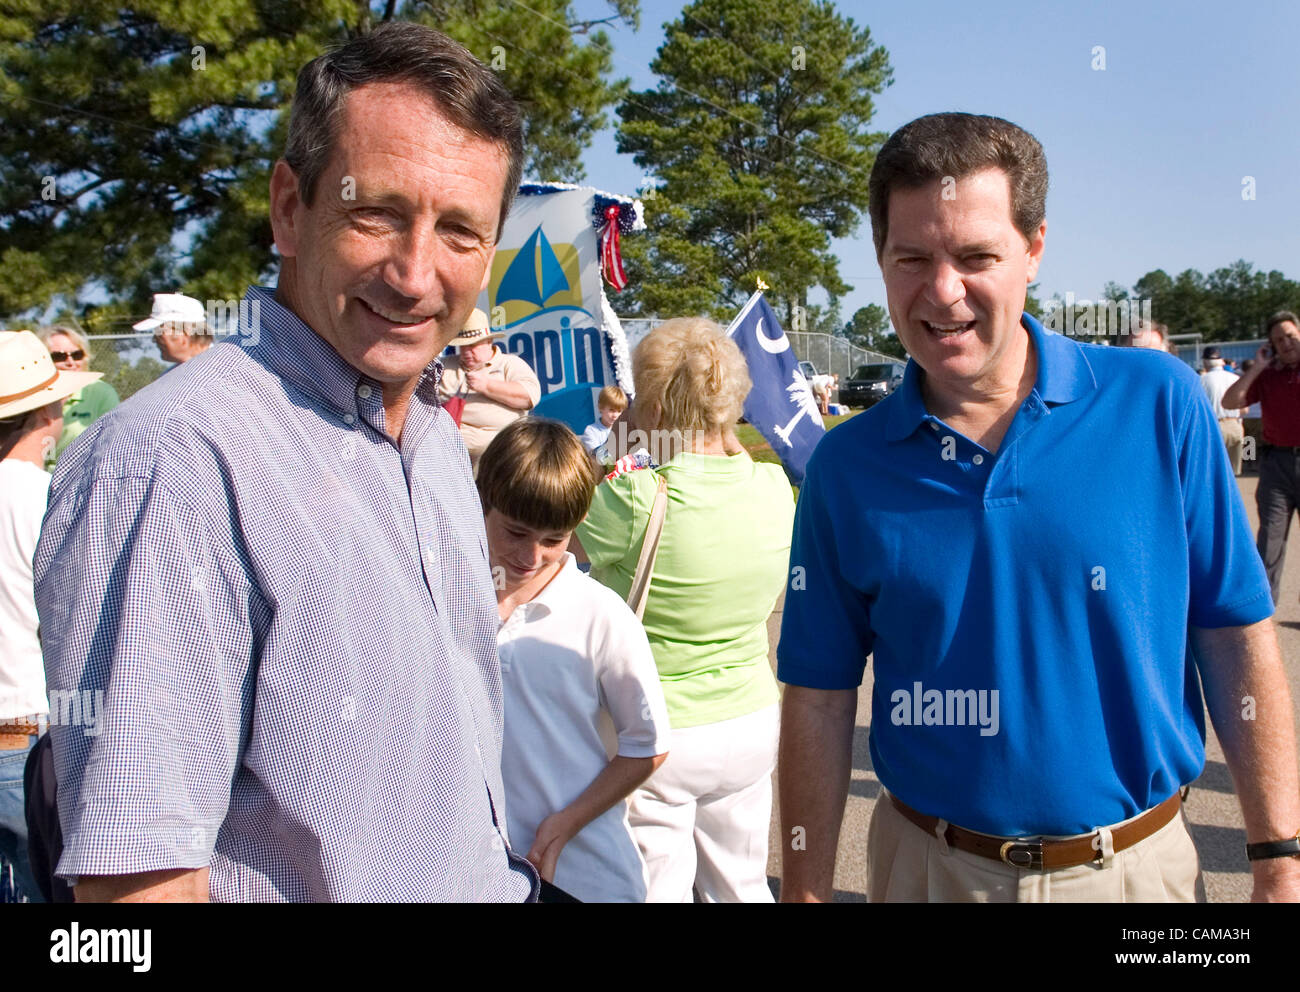 South Carolina Governor Mark Sanford, left, and his sons, speaks with former Republican presidential candidate Sam Brownback at a Labor Day Parade in Chapin, South Carolina on September 3, 2007. (Credit Image: © Erik Lesser/ZUMA Press) Stock Photo